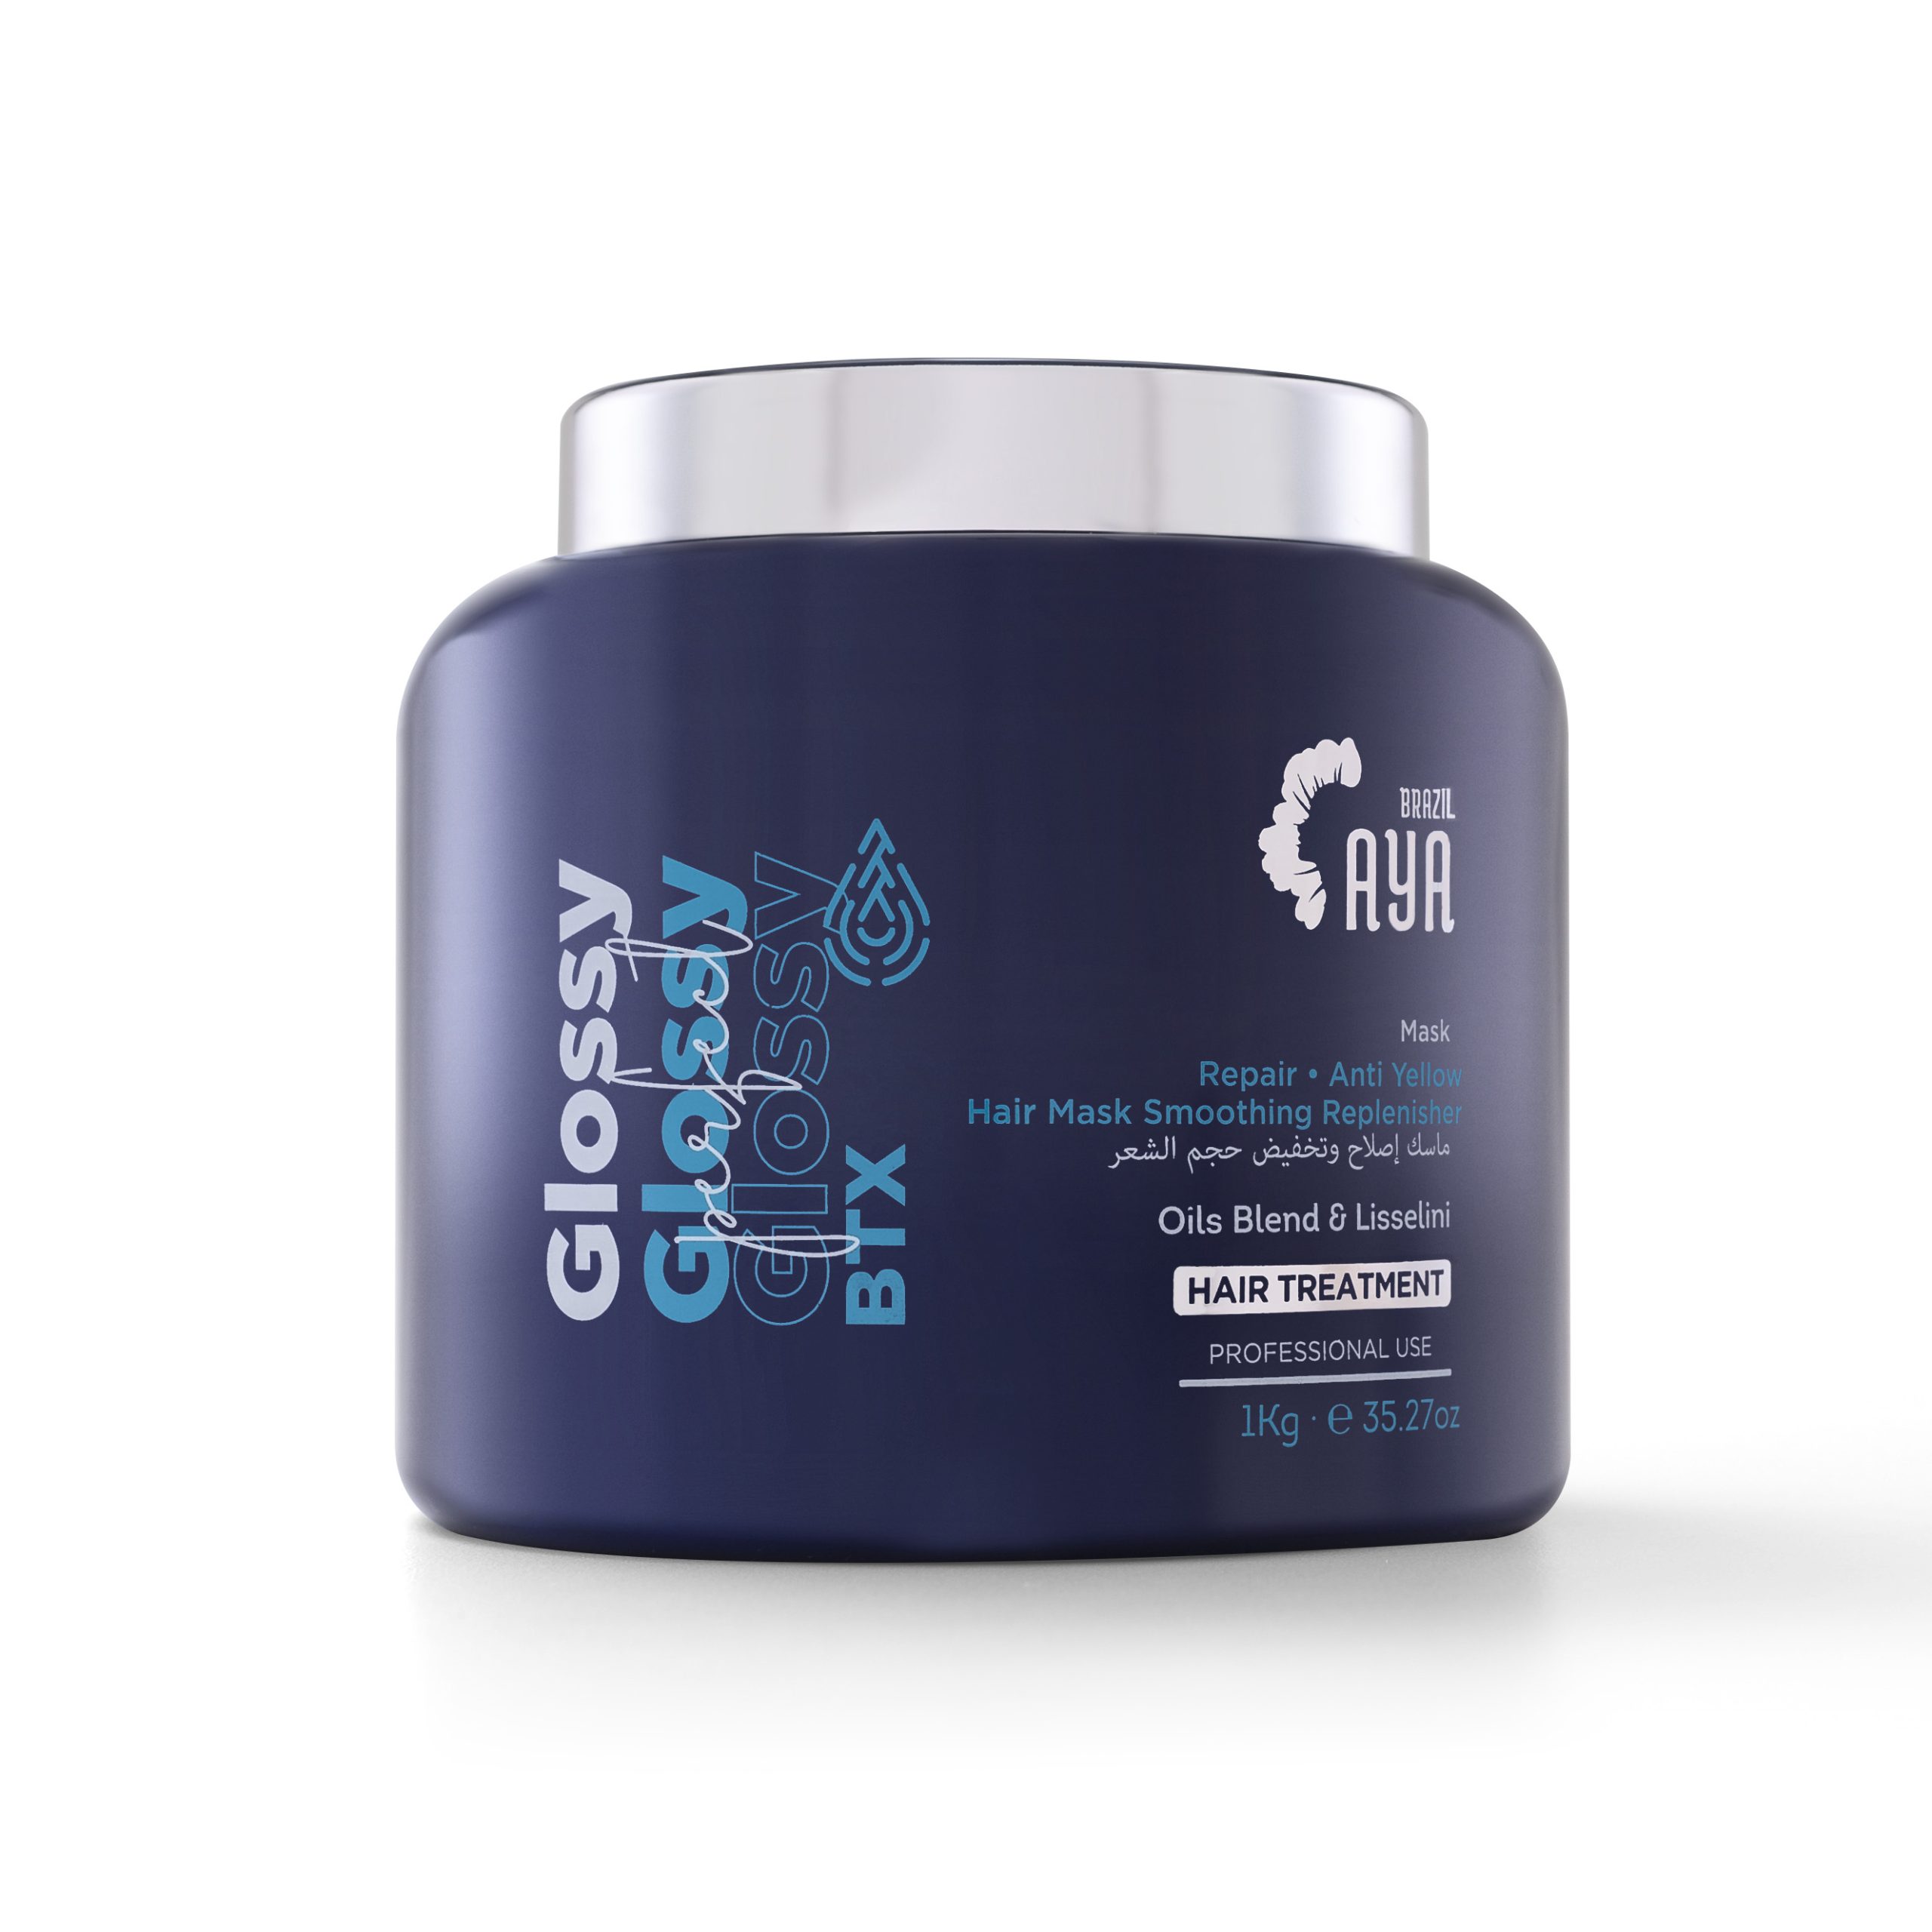 Repair and Hair Smoothing Replenisher Mask by Aya Brazil